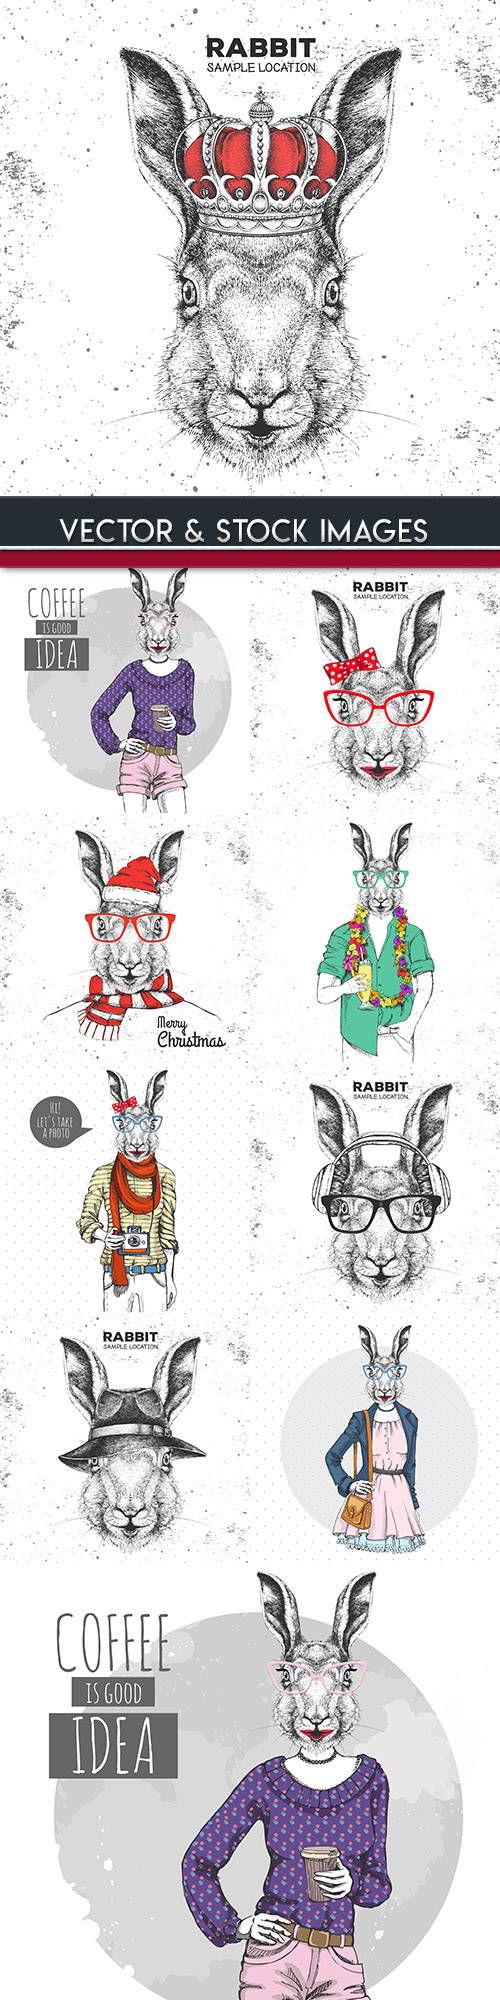 Rabbit in clothes and accessories painted illustrations